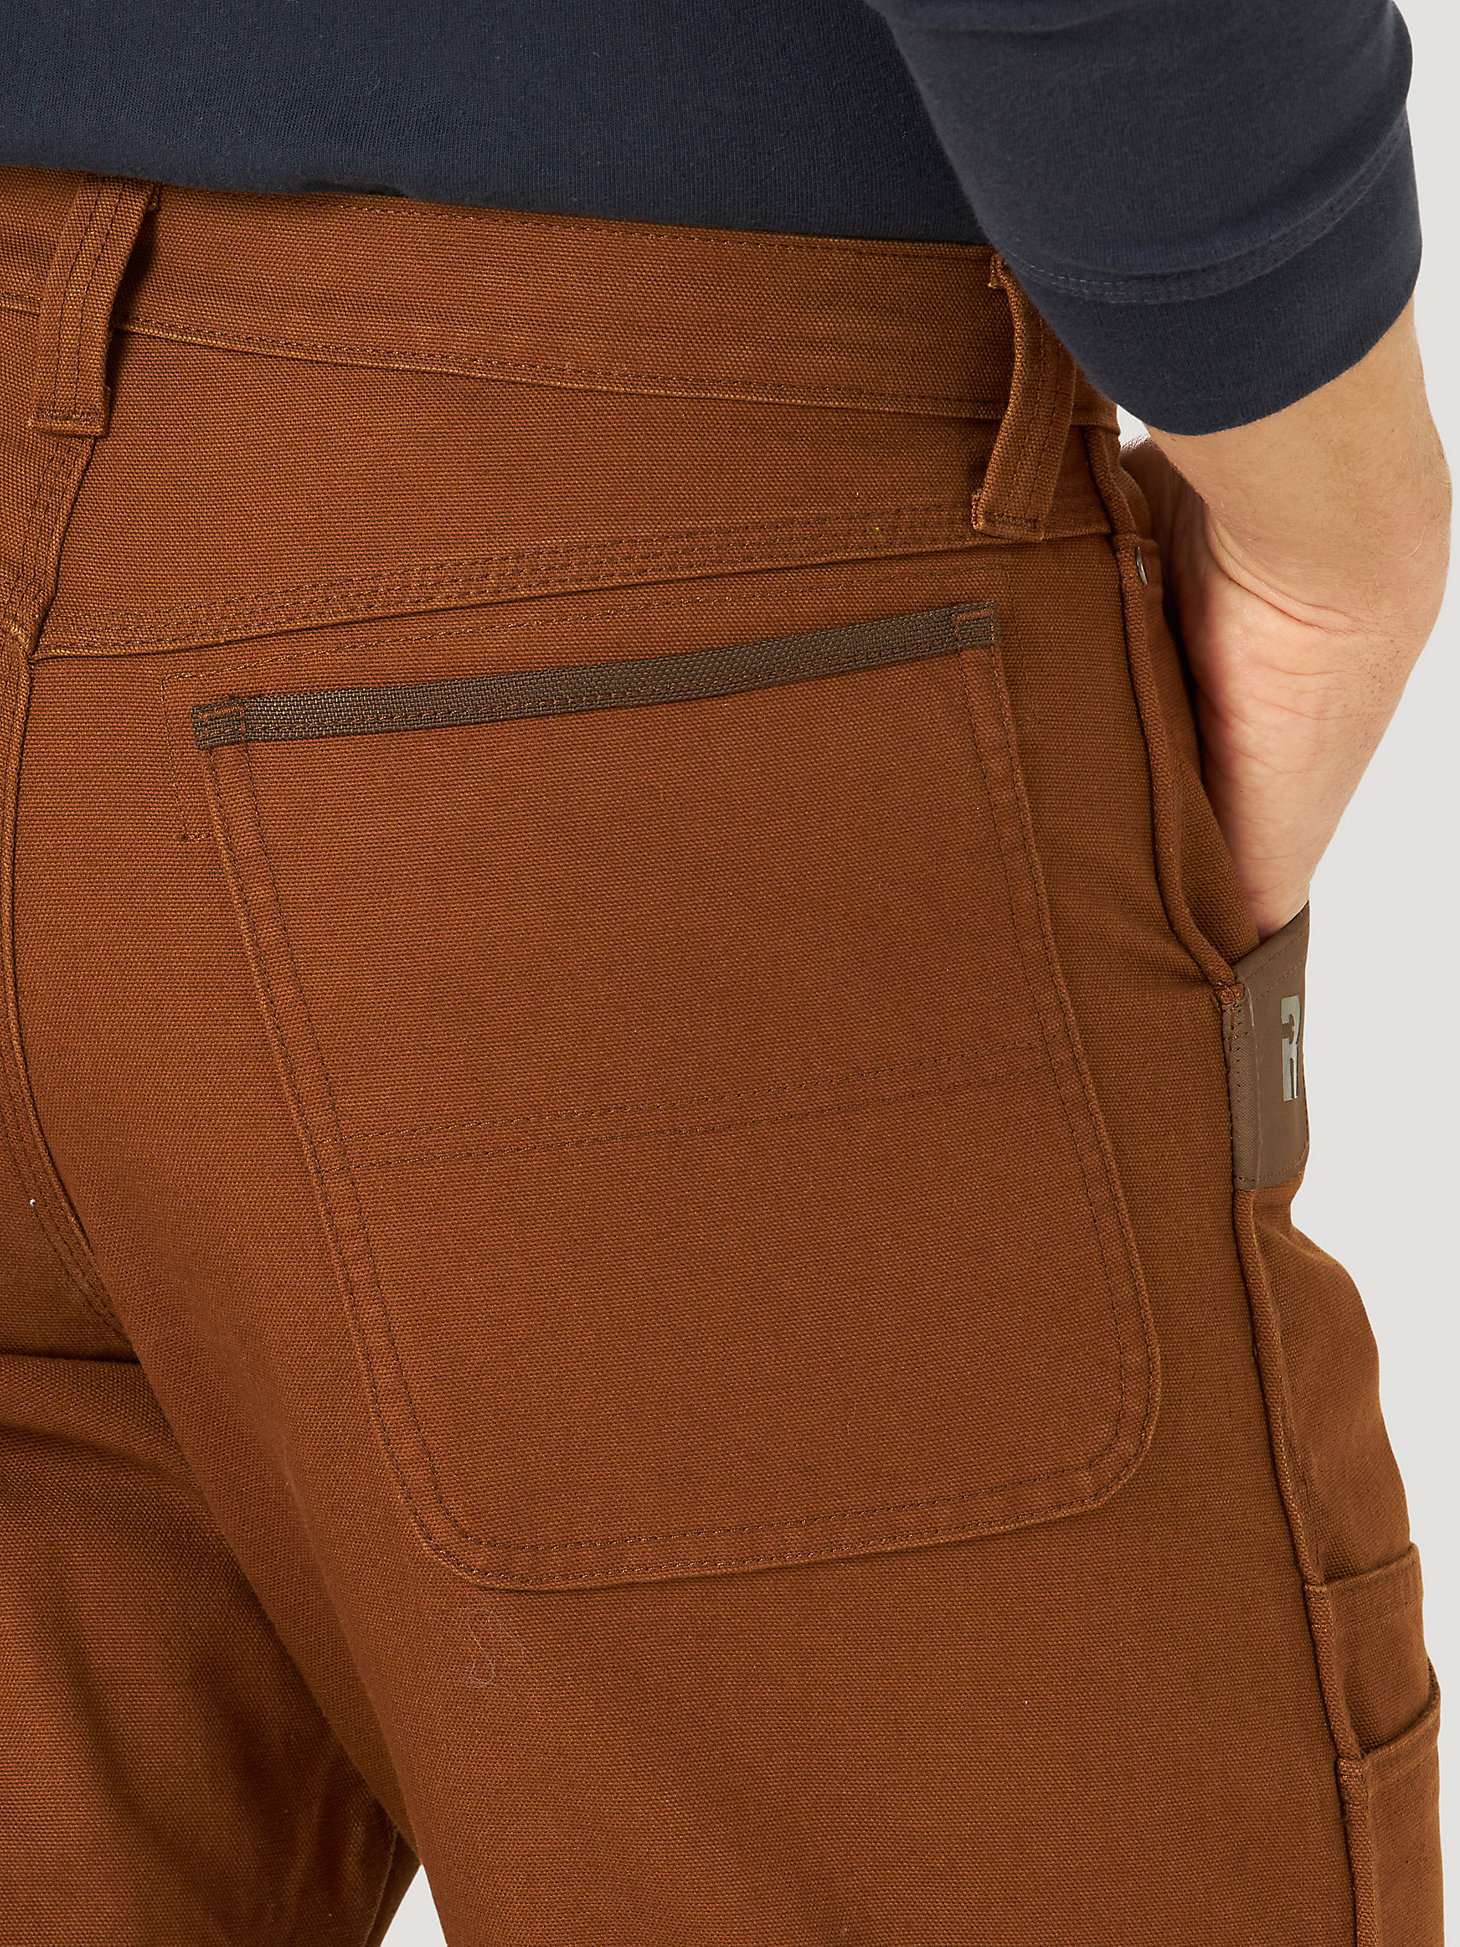 Wrangler® RIGGS Workwear® Mason Relaxed Fit Canvas Pant in Toffee Brown alternative view 4